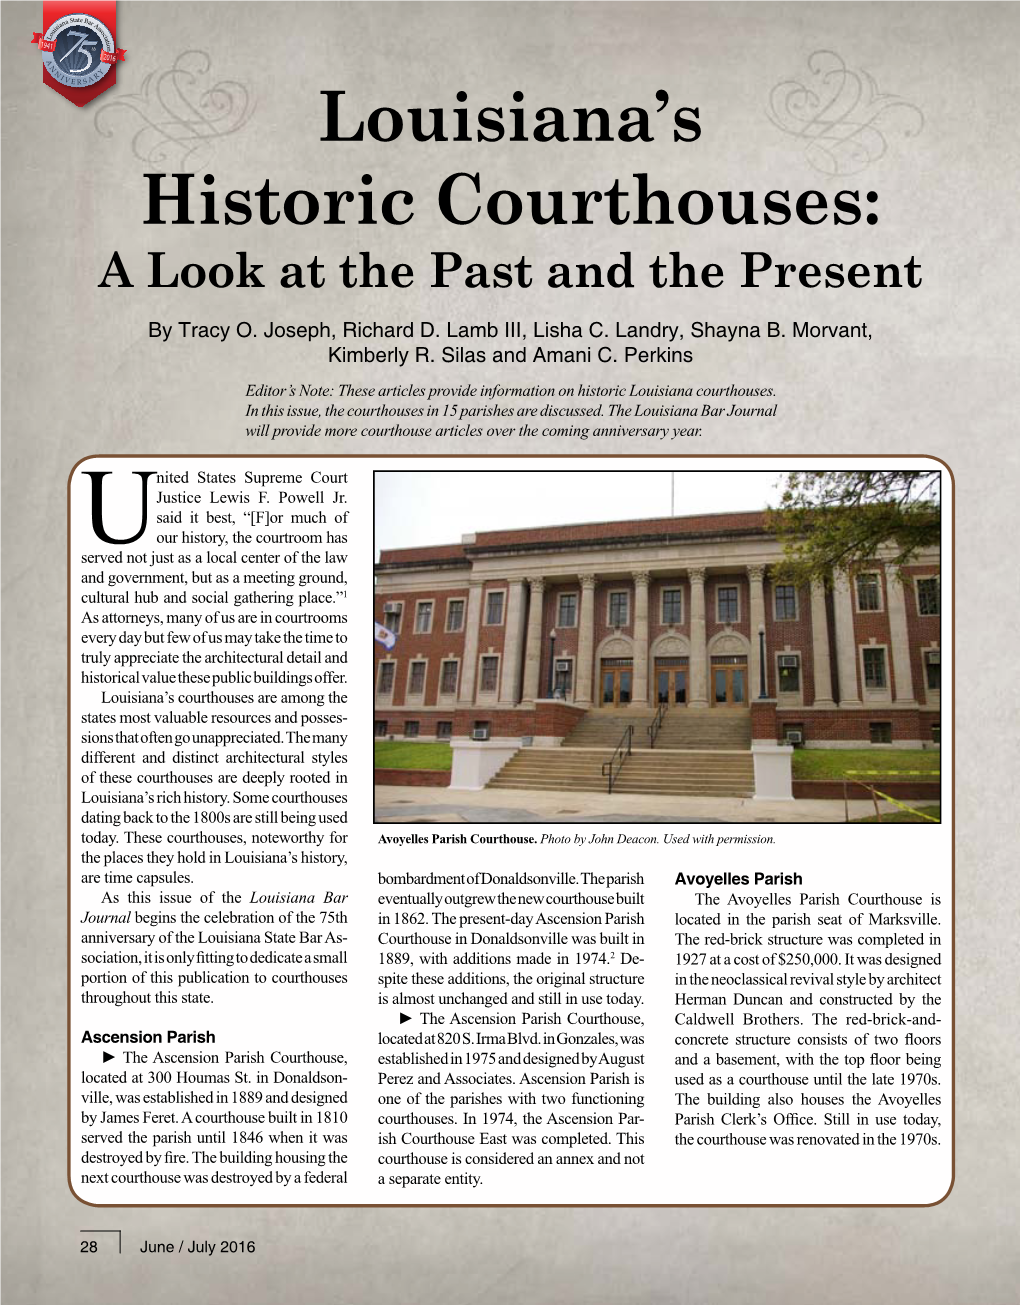 Courthouses: a Look at the Past and the Present by Tracy O